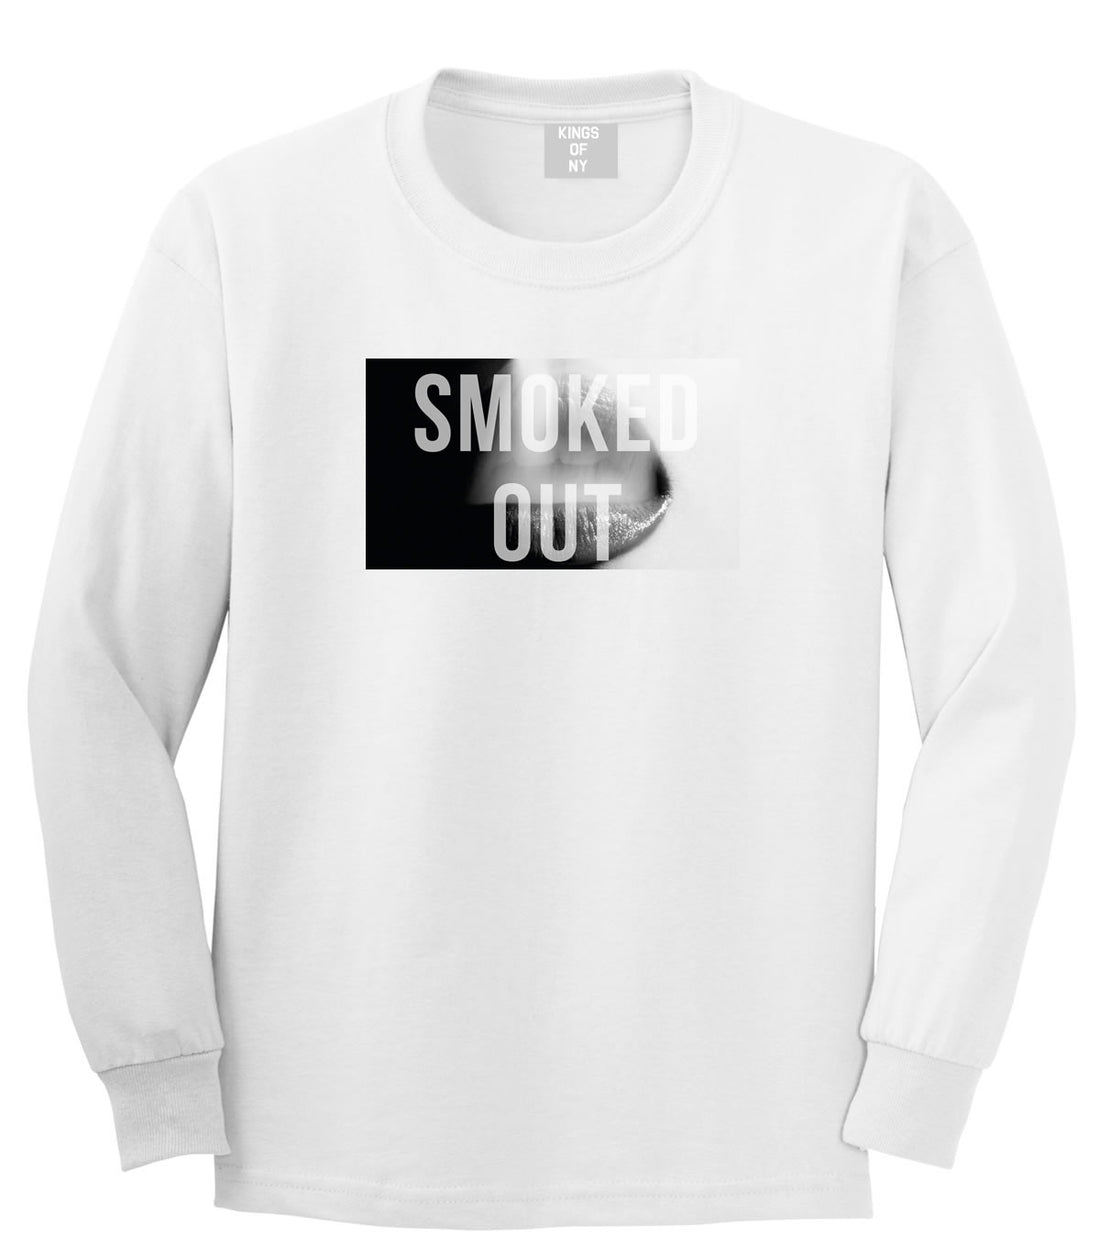 Smoked Out Weed Marijuana Girls Pot New York Long Sleeve T-Shirt in White by Kings Of NY